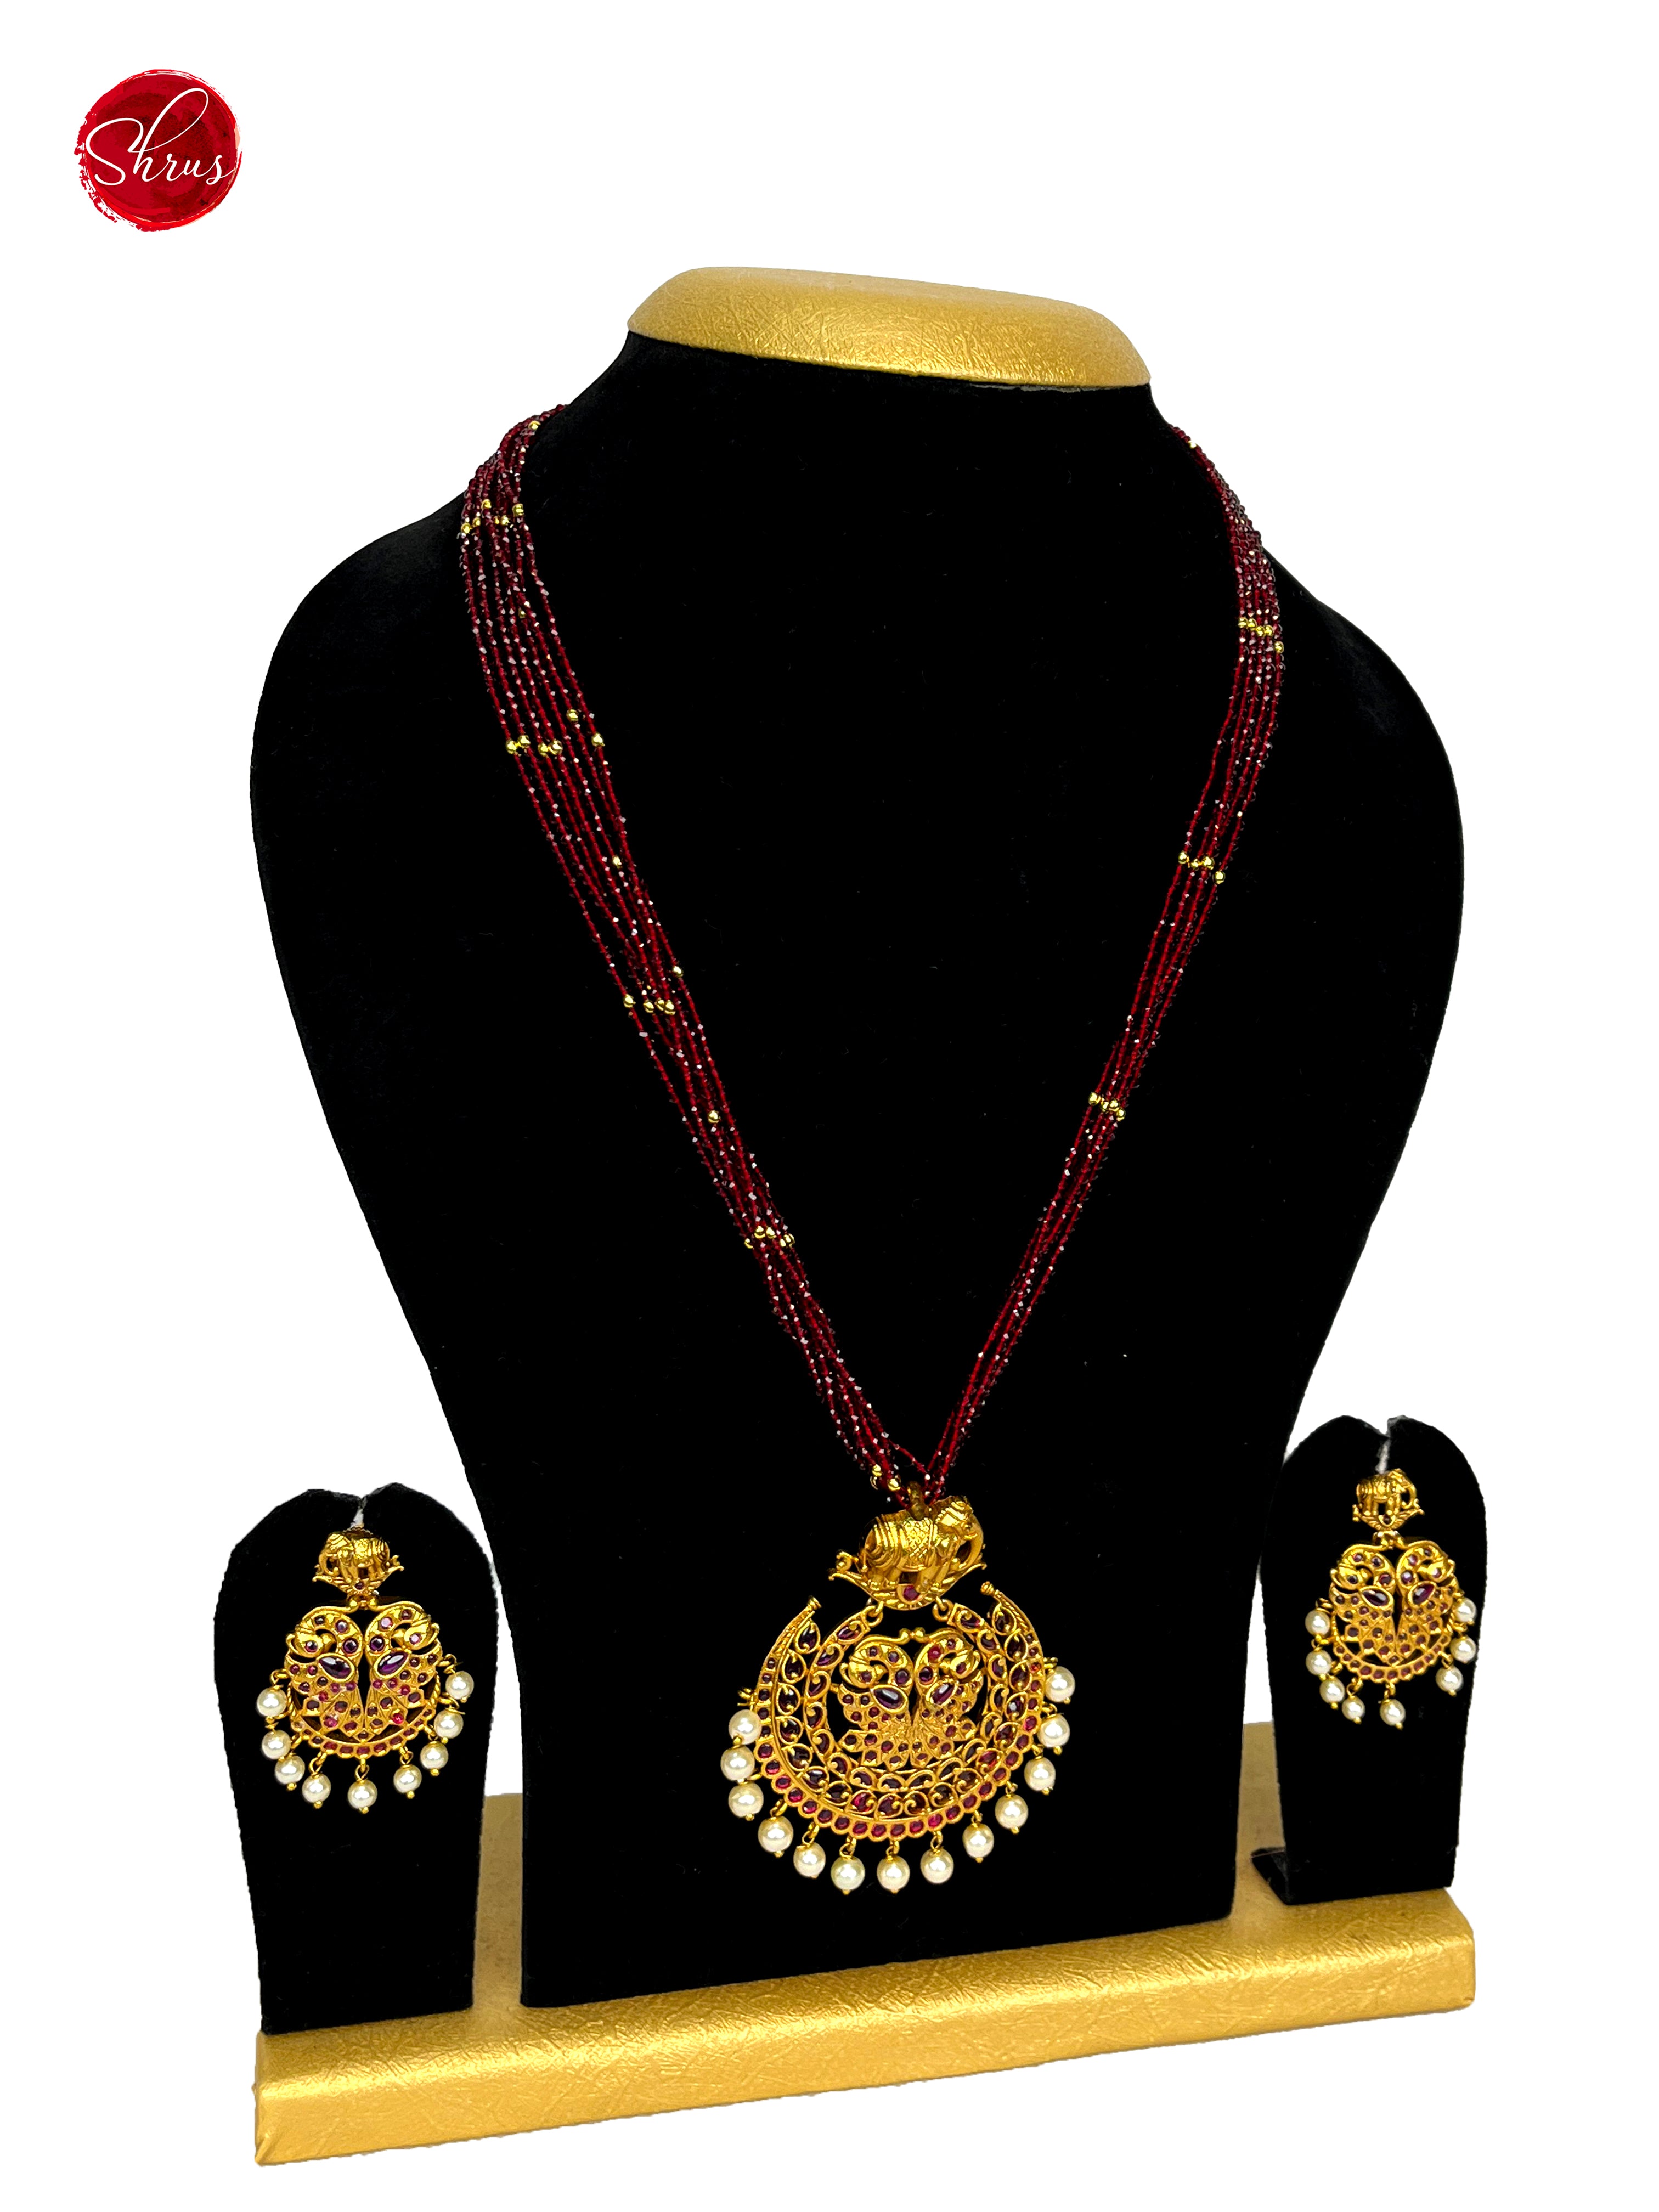 Crystal Beads with gold plated Pendant - NECK PIECE & EARRINGS - Shop on ShrusEternity.com